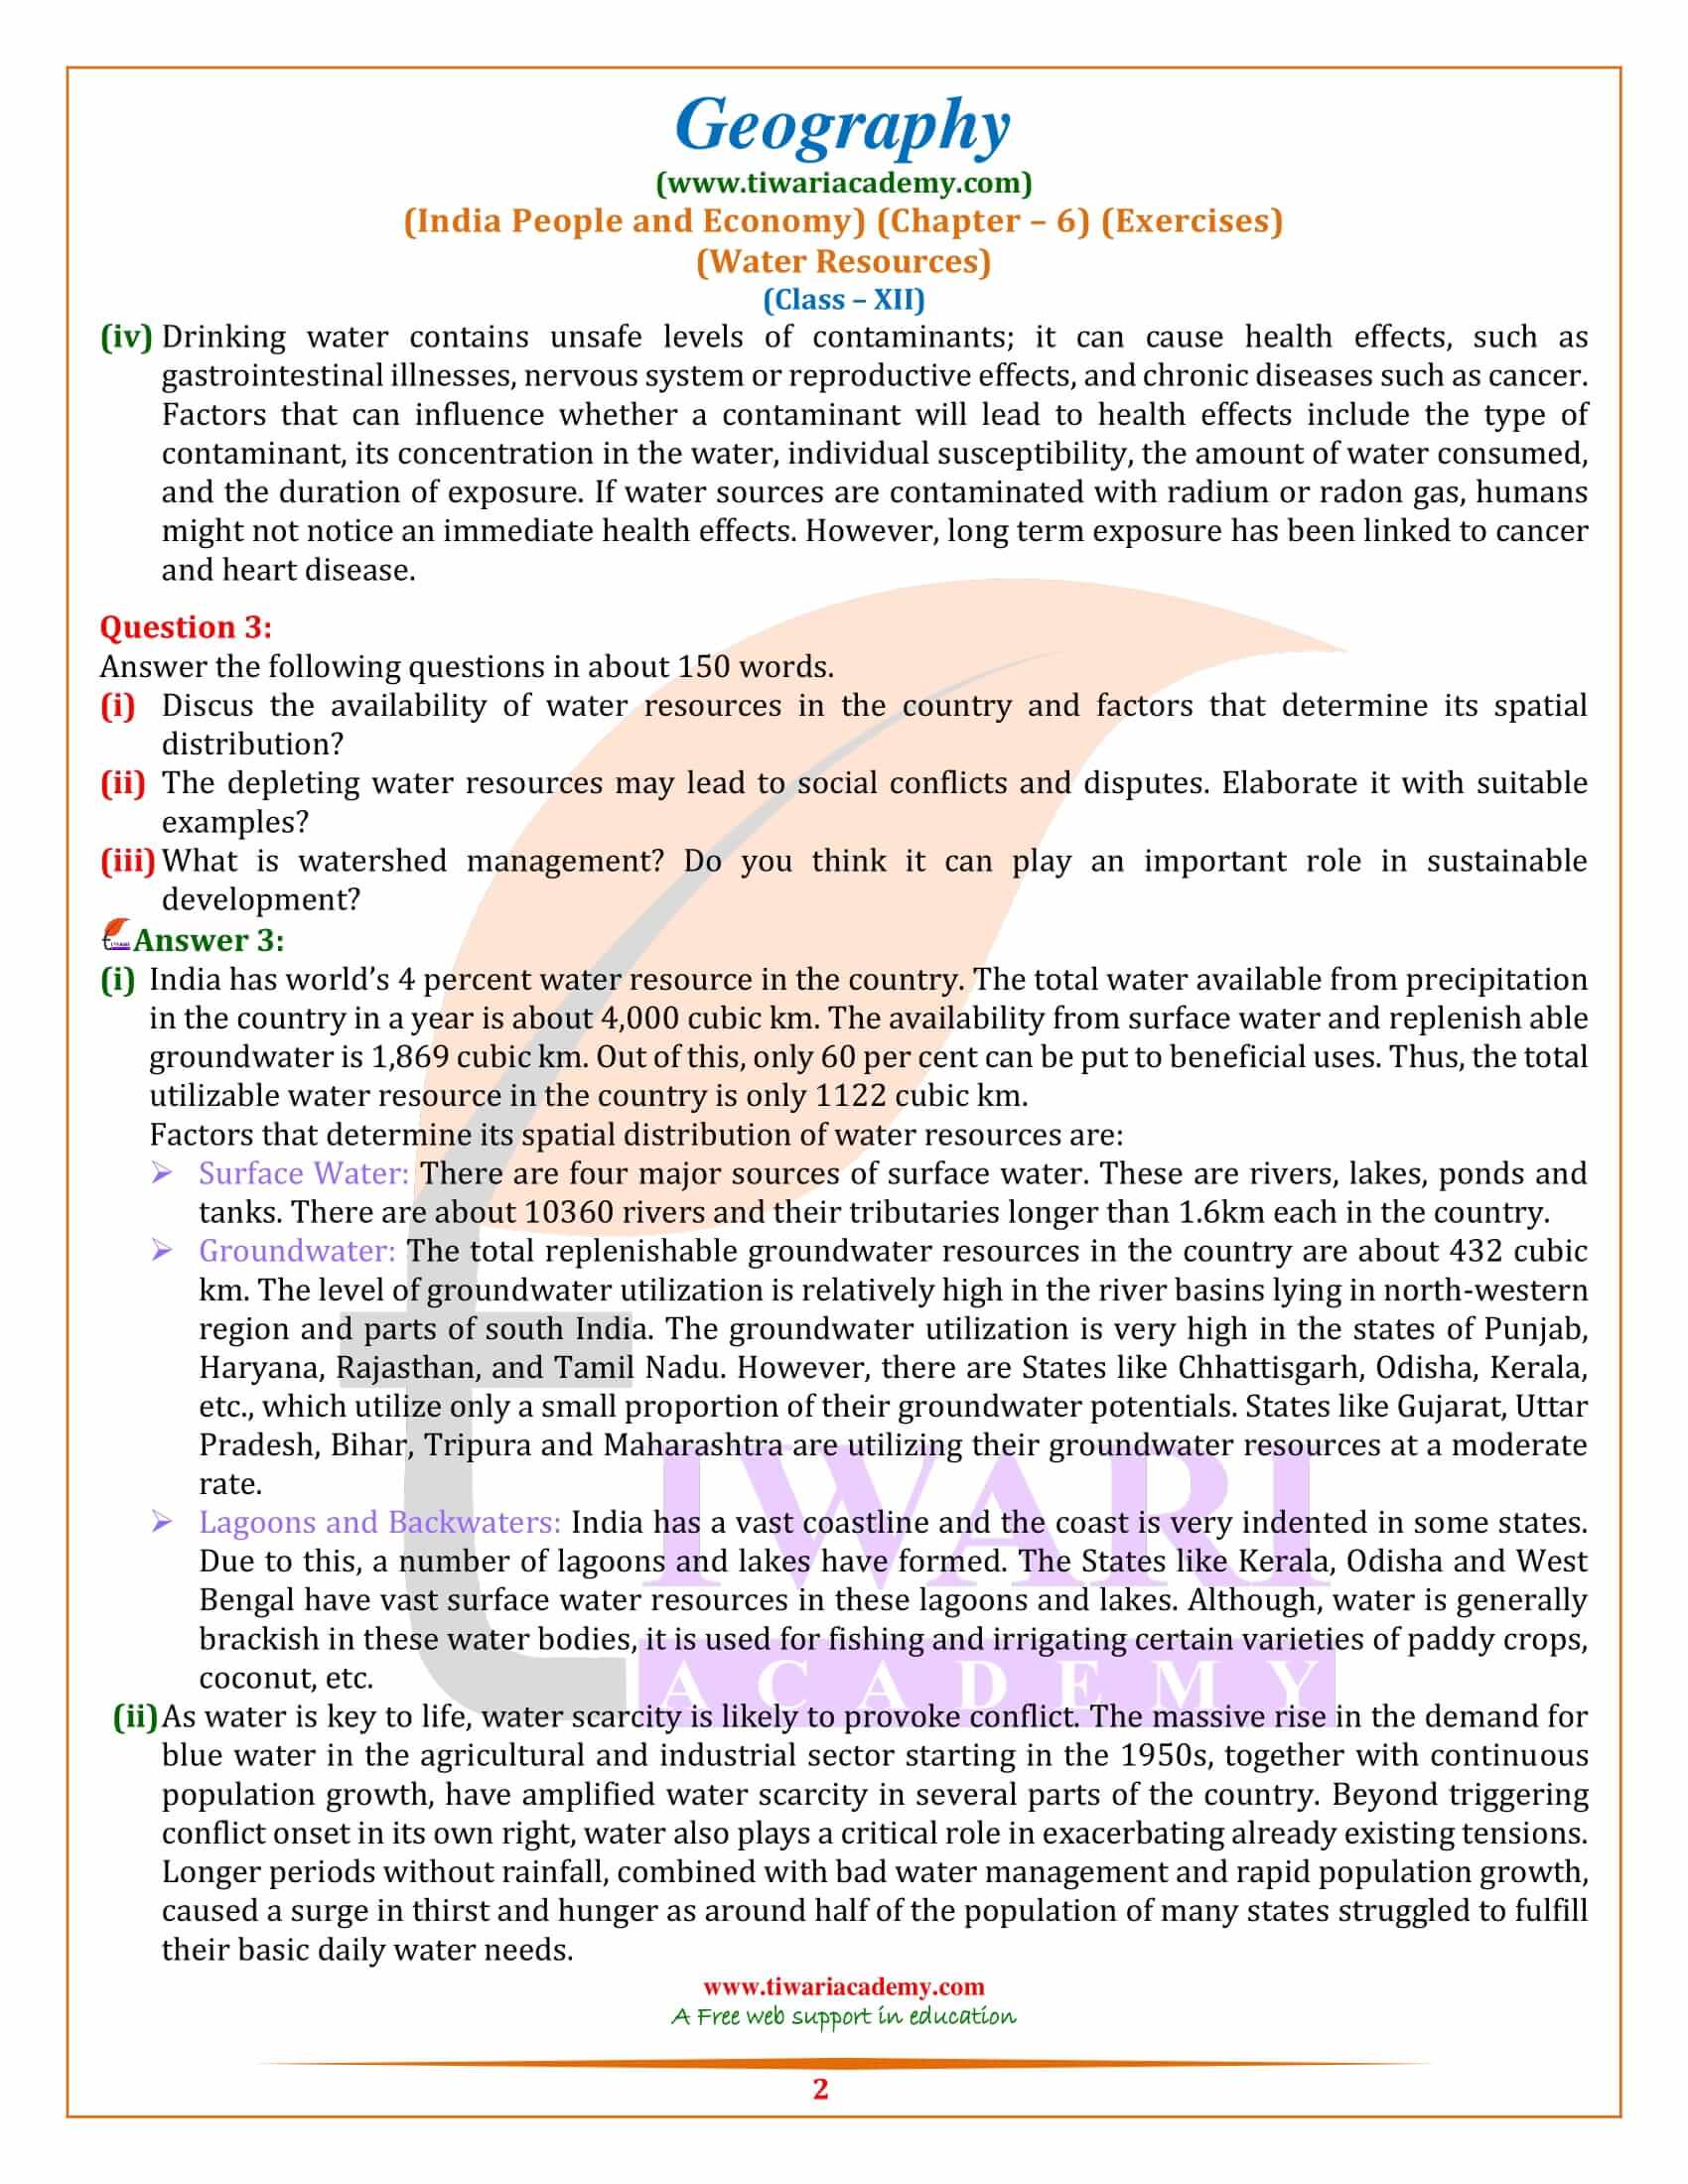 NCERT Solutions for Class 12 Geography Chapter 6